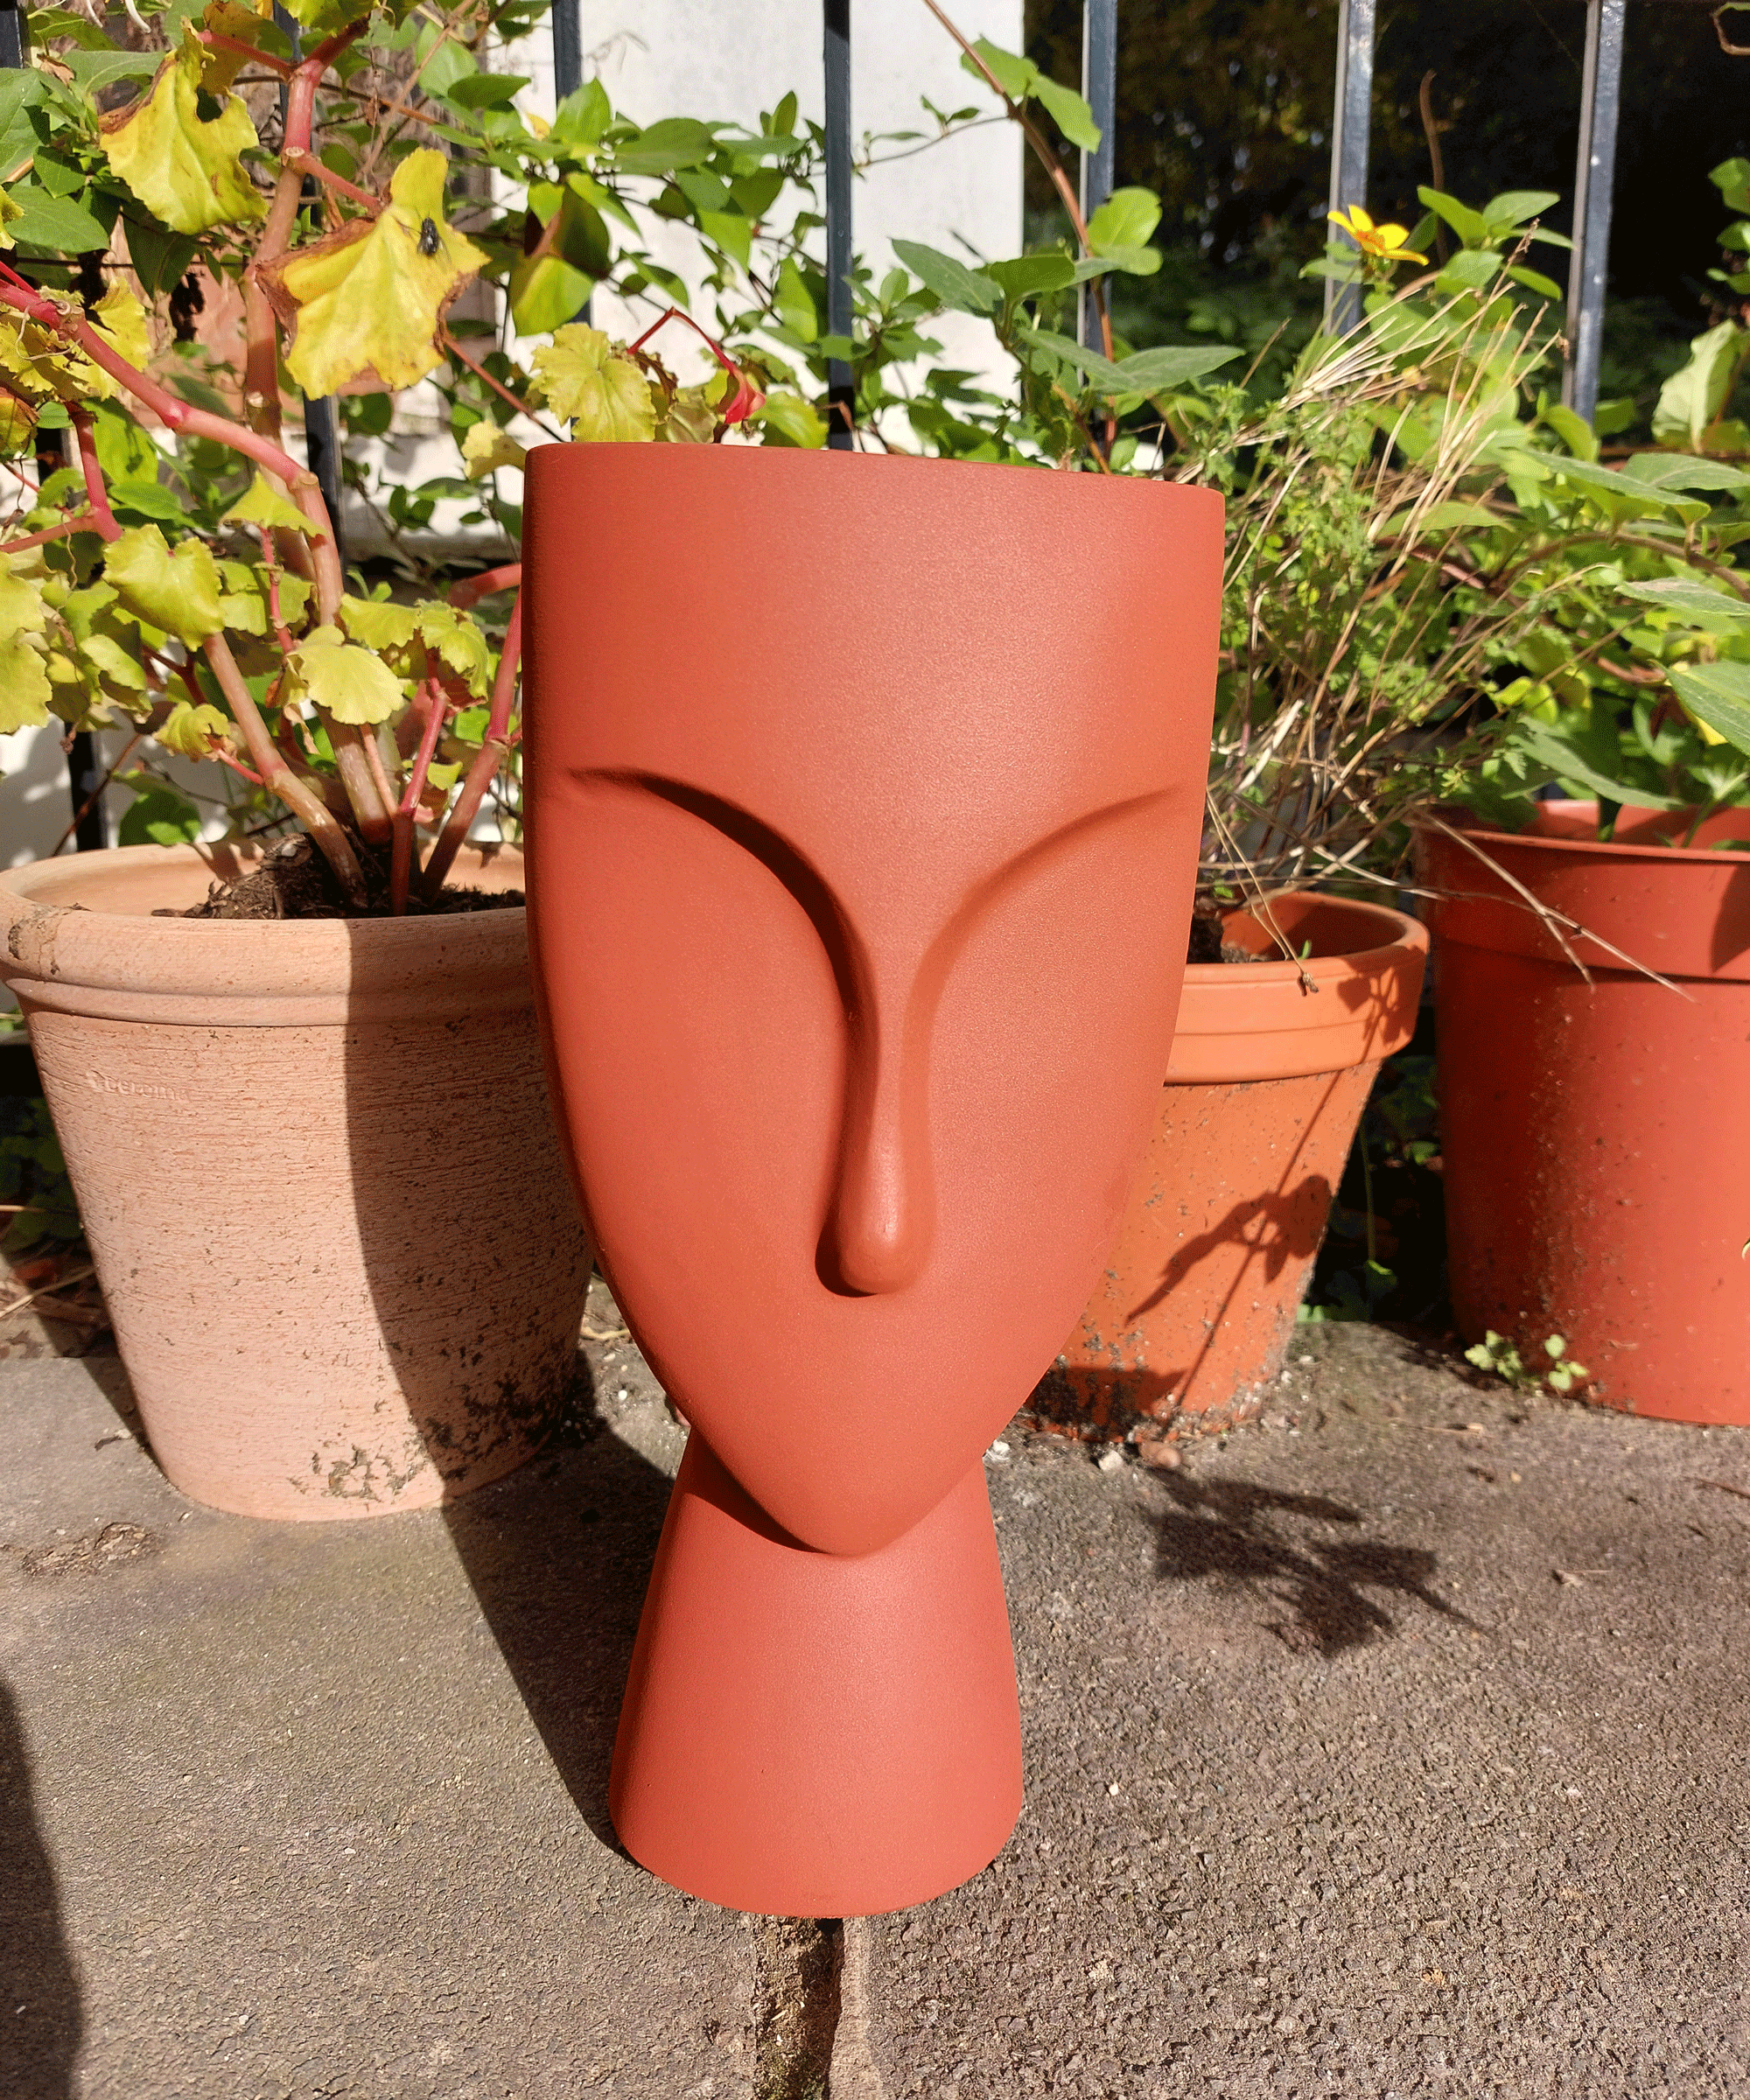 vase after being painted